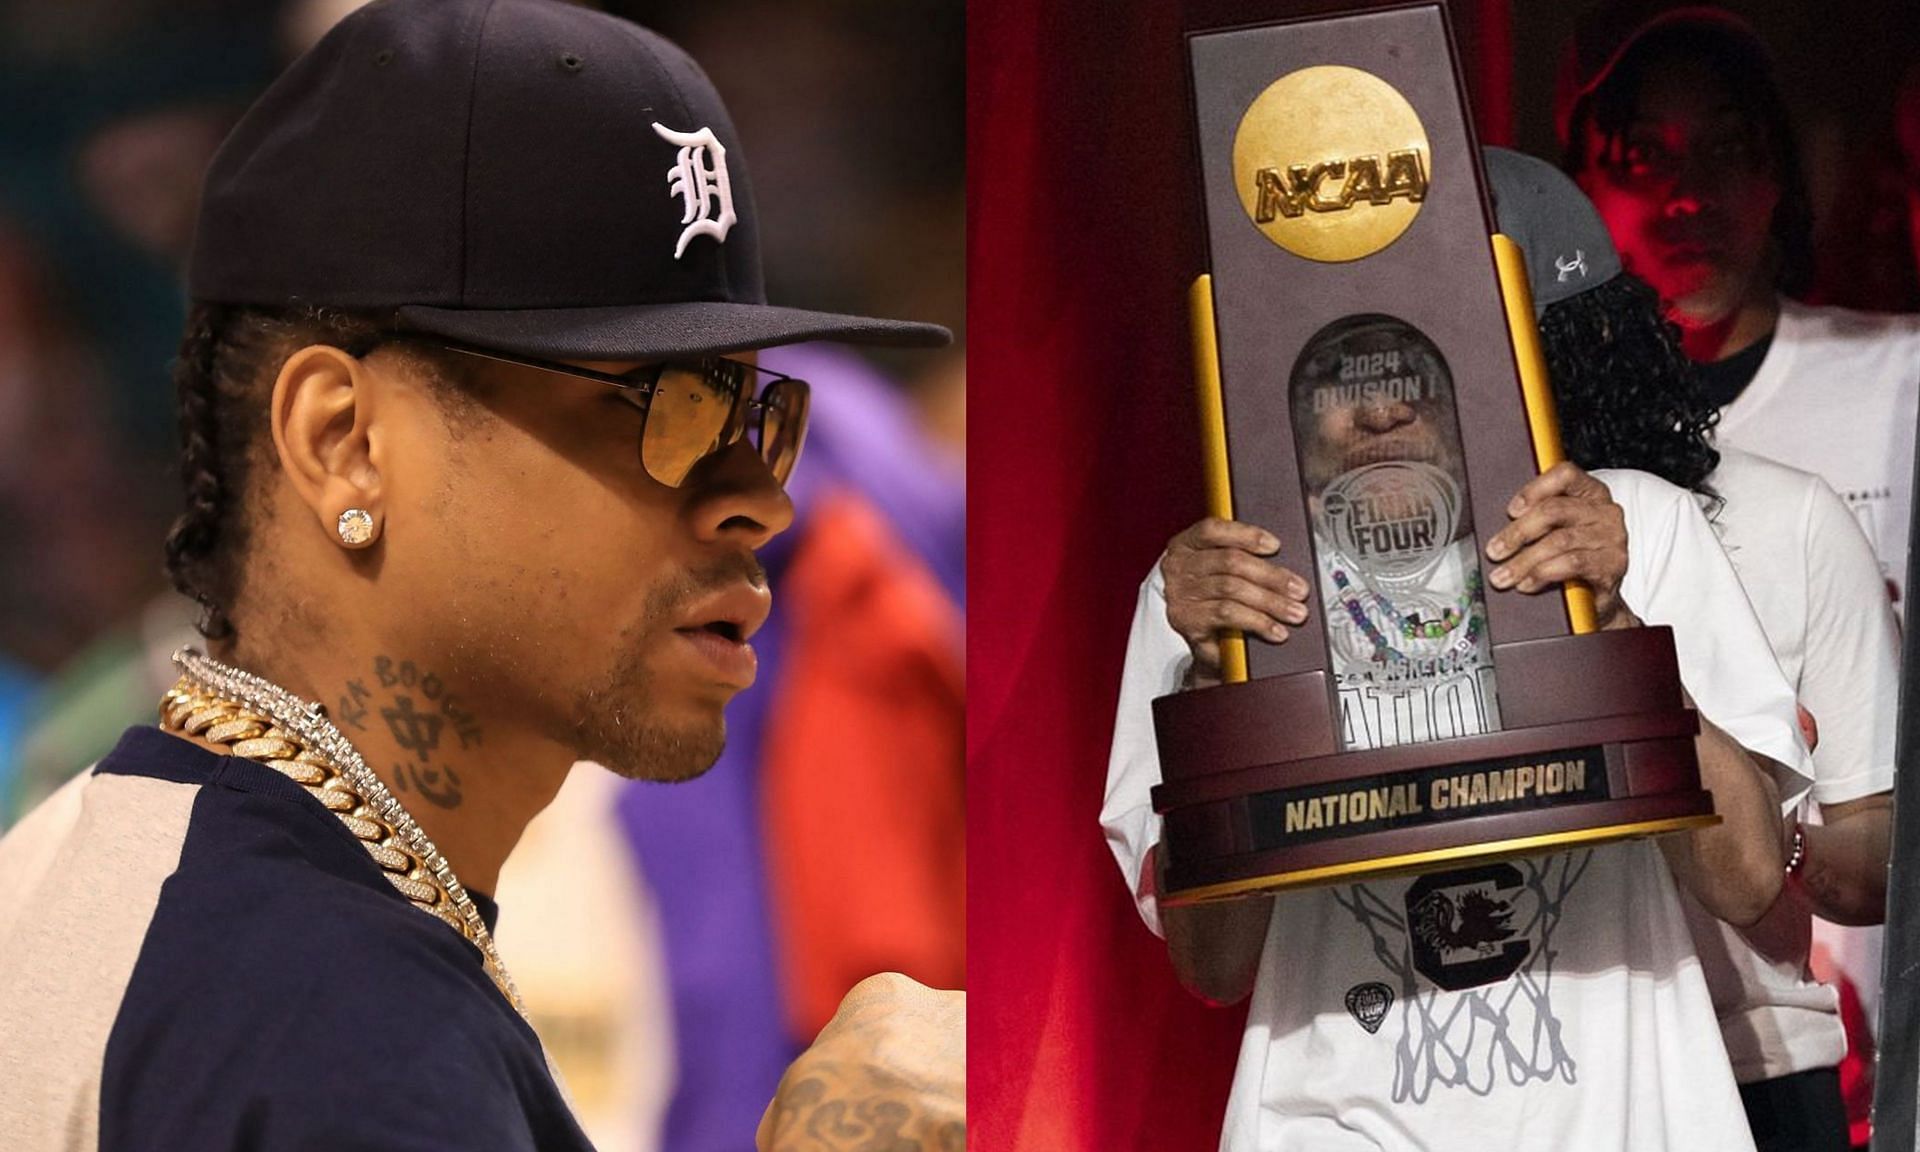 Allen Iverson shared his admiration for Dawn Staley.